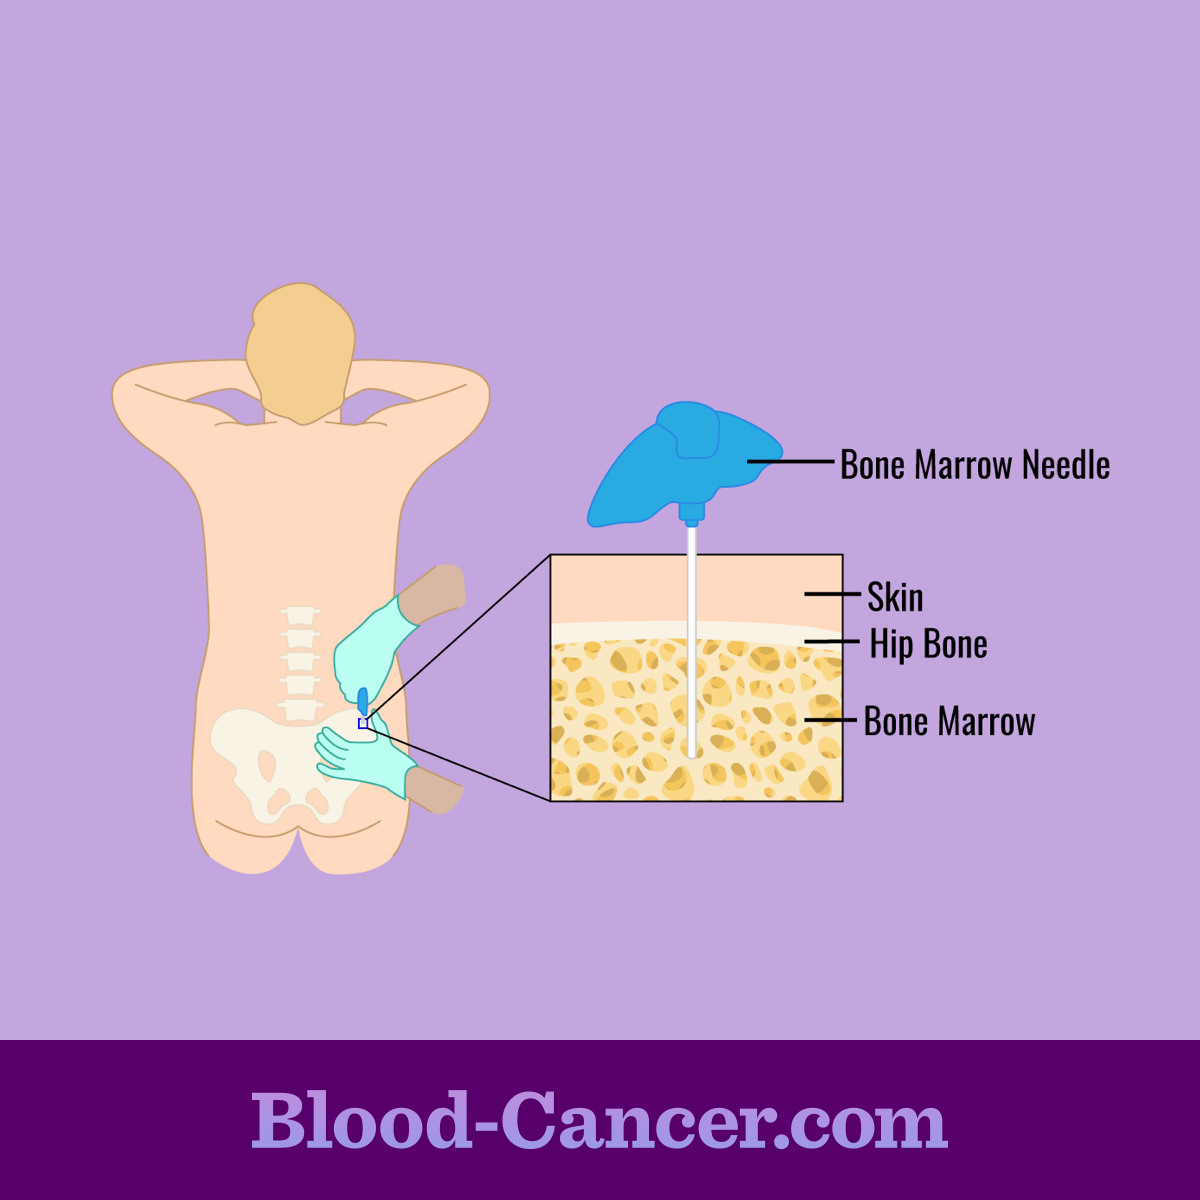 Bone marrow needle inserted through the skin and hip and into the bone marrow of a person lying face down